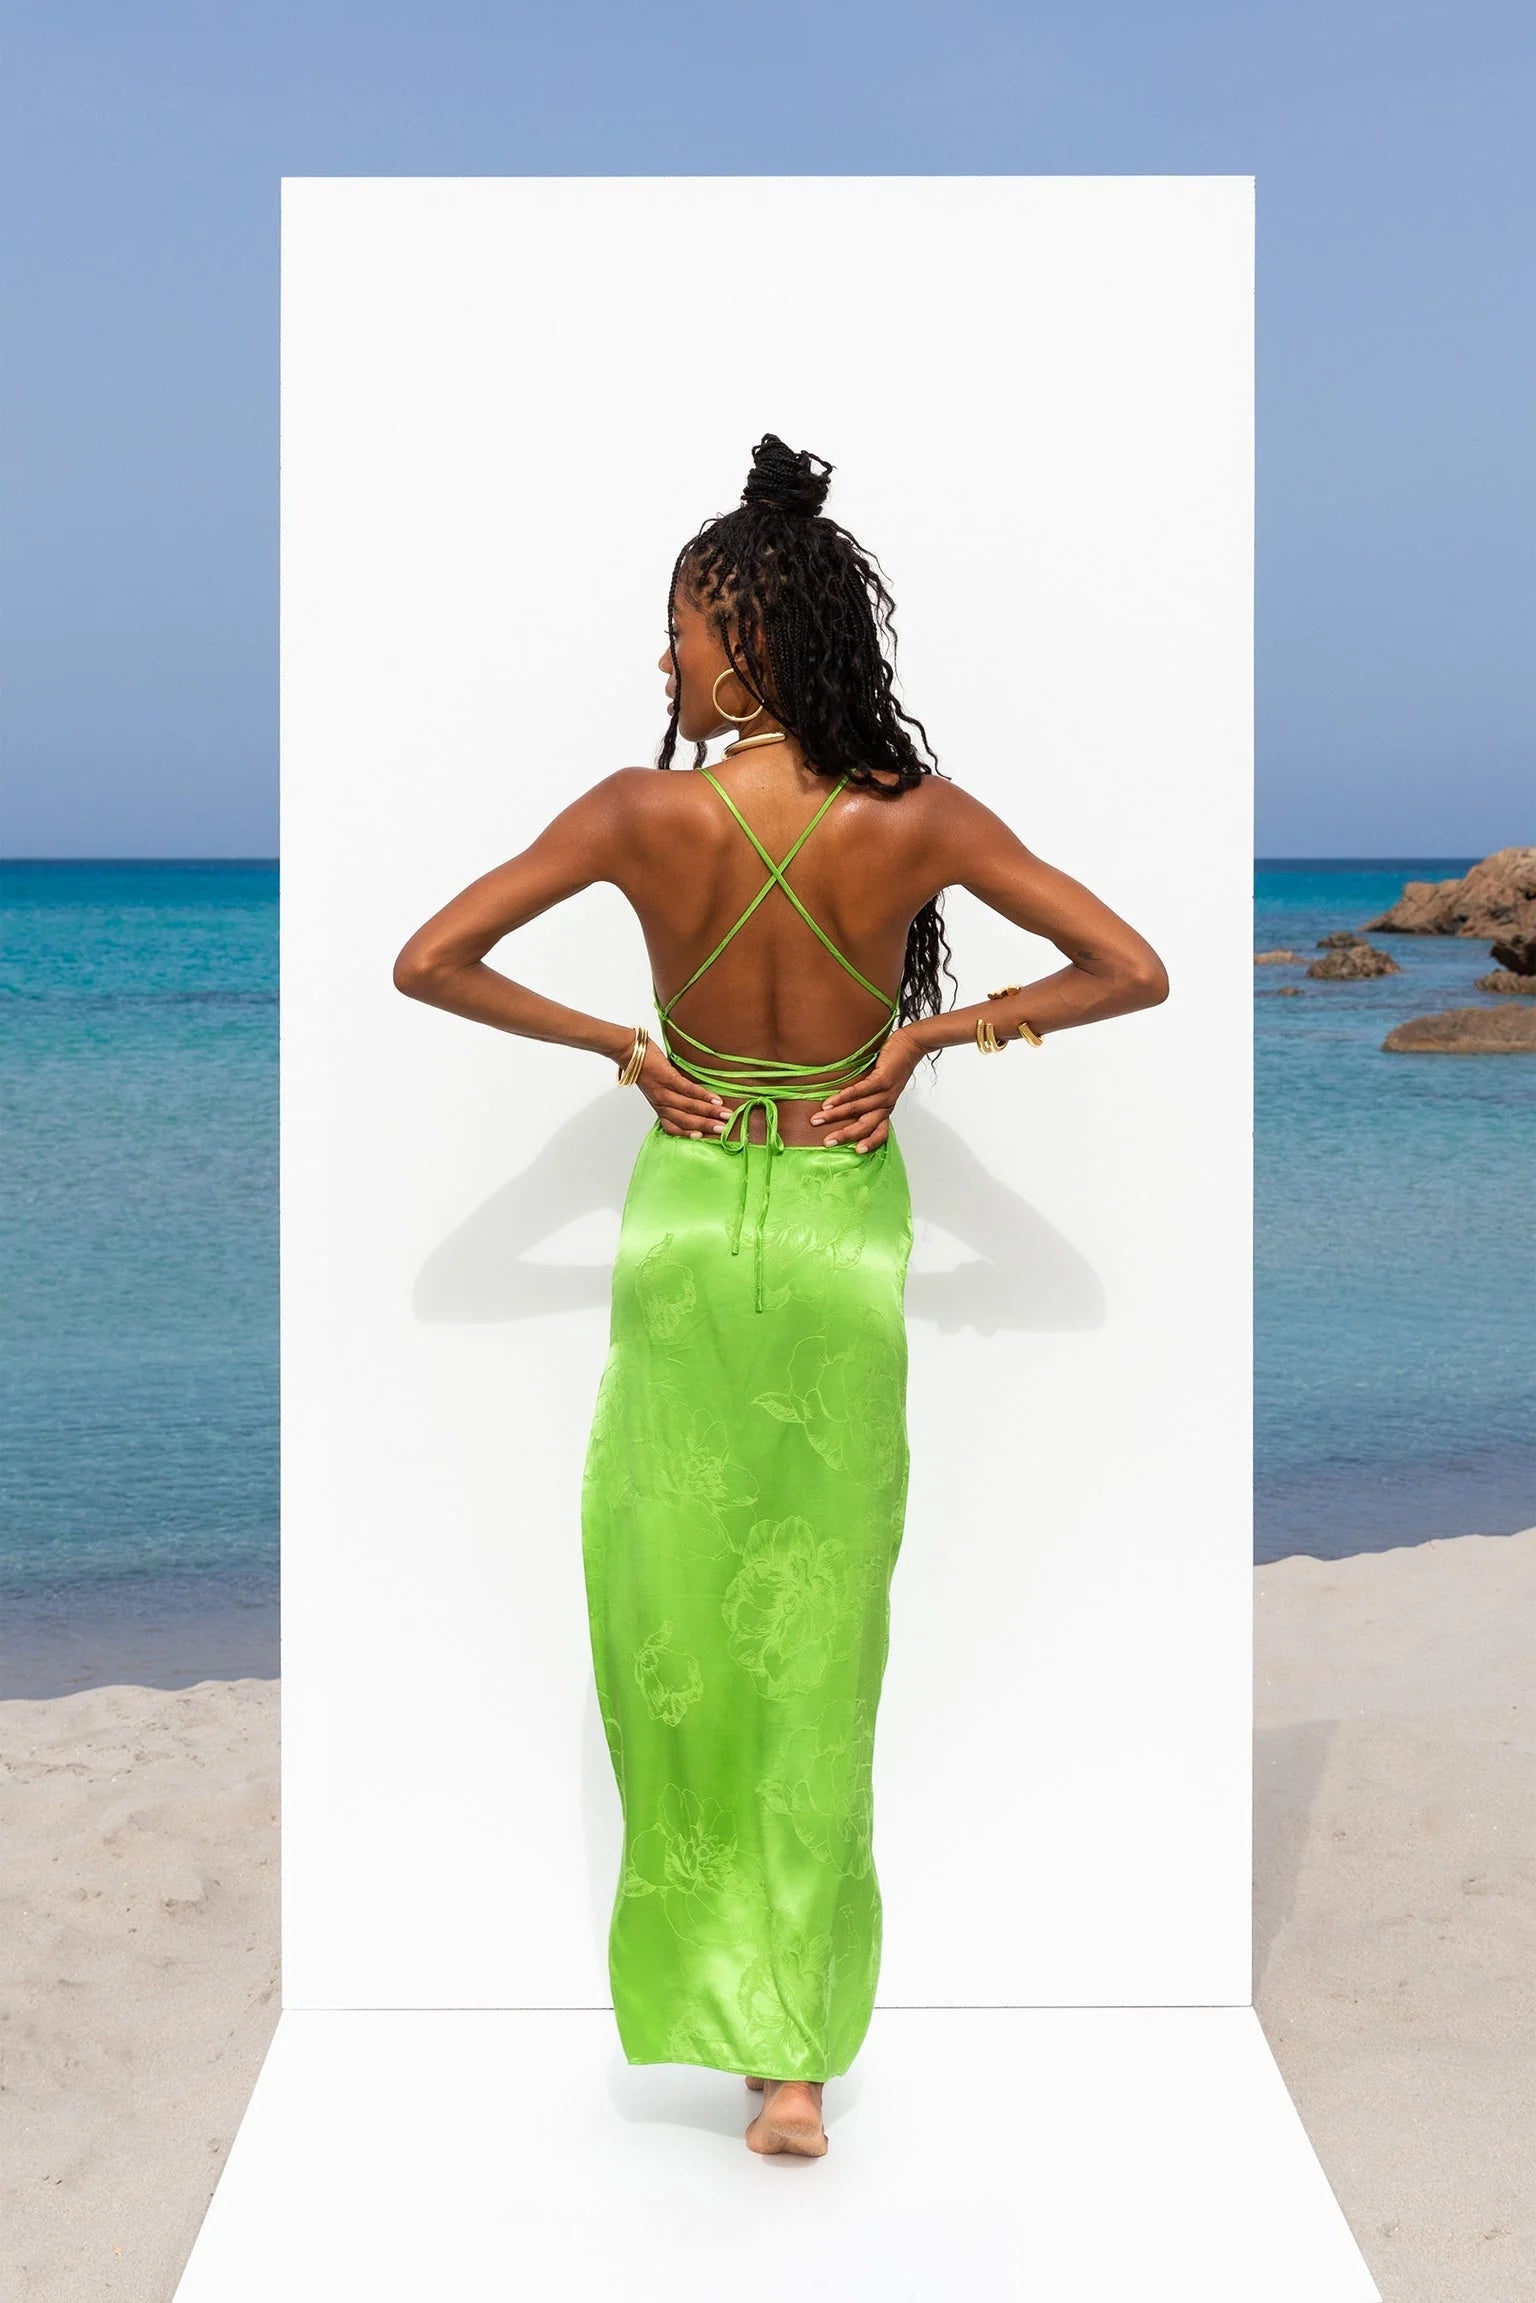 A woman in a green dress standing on the beach.